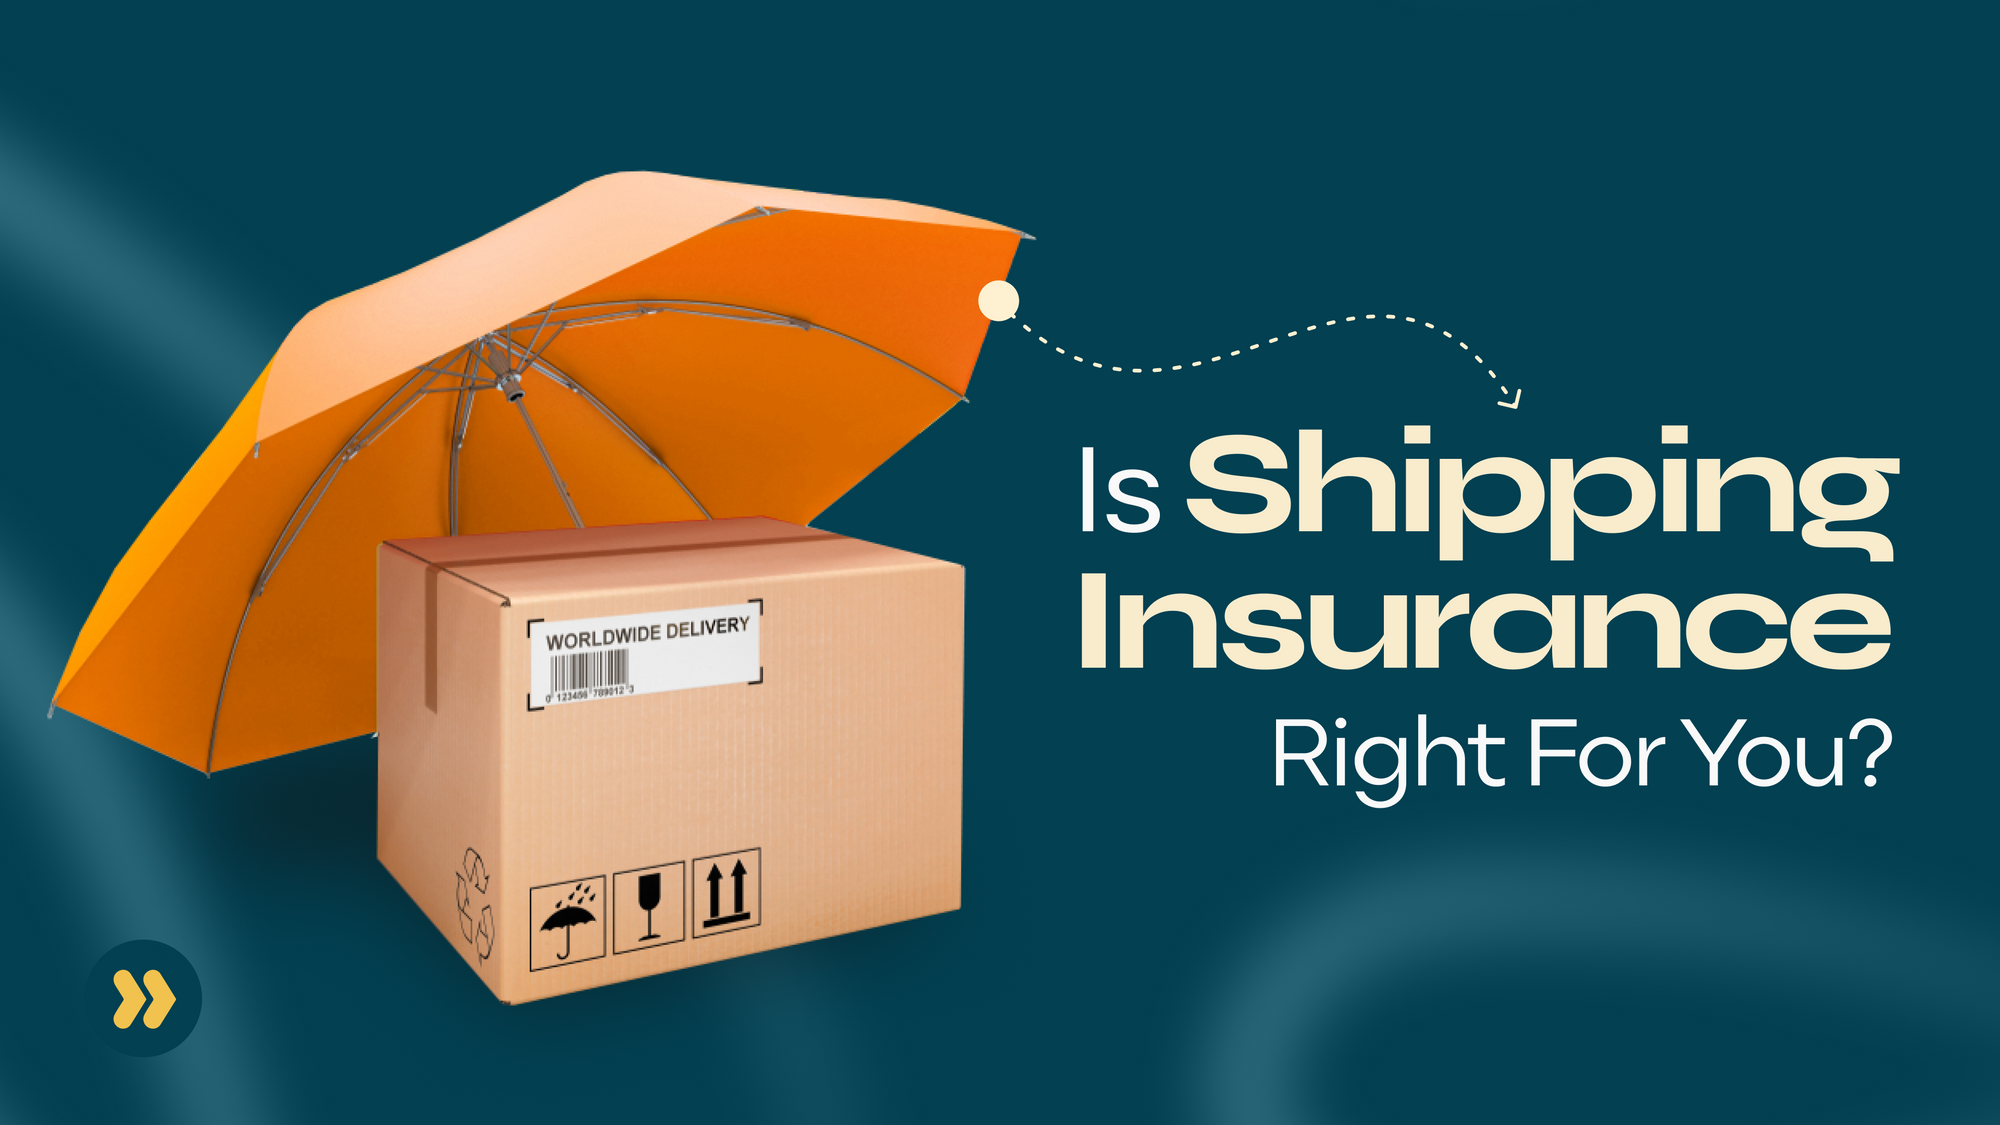 Is Shipping Insurance Right For You?